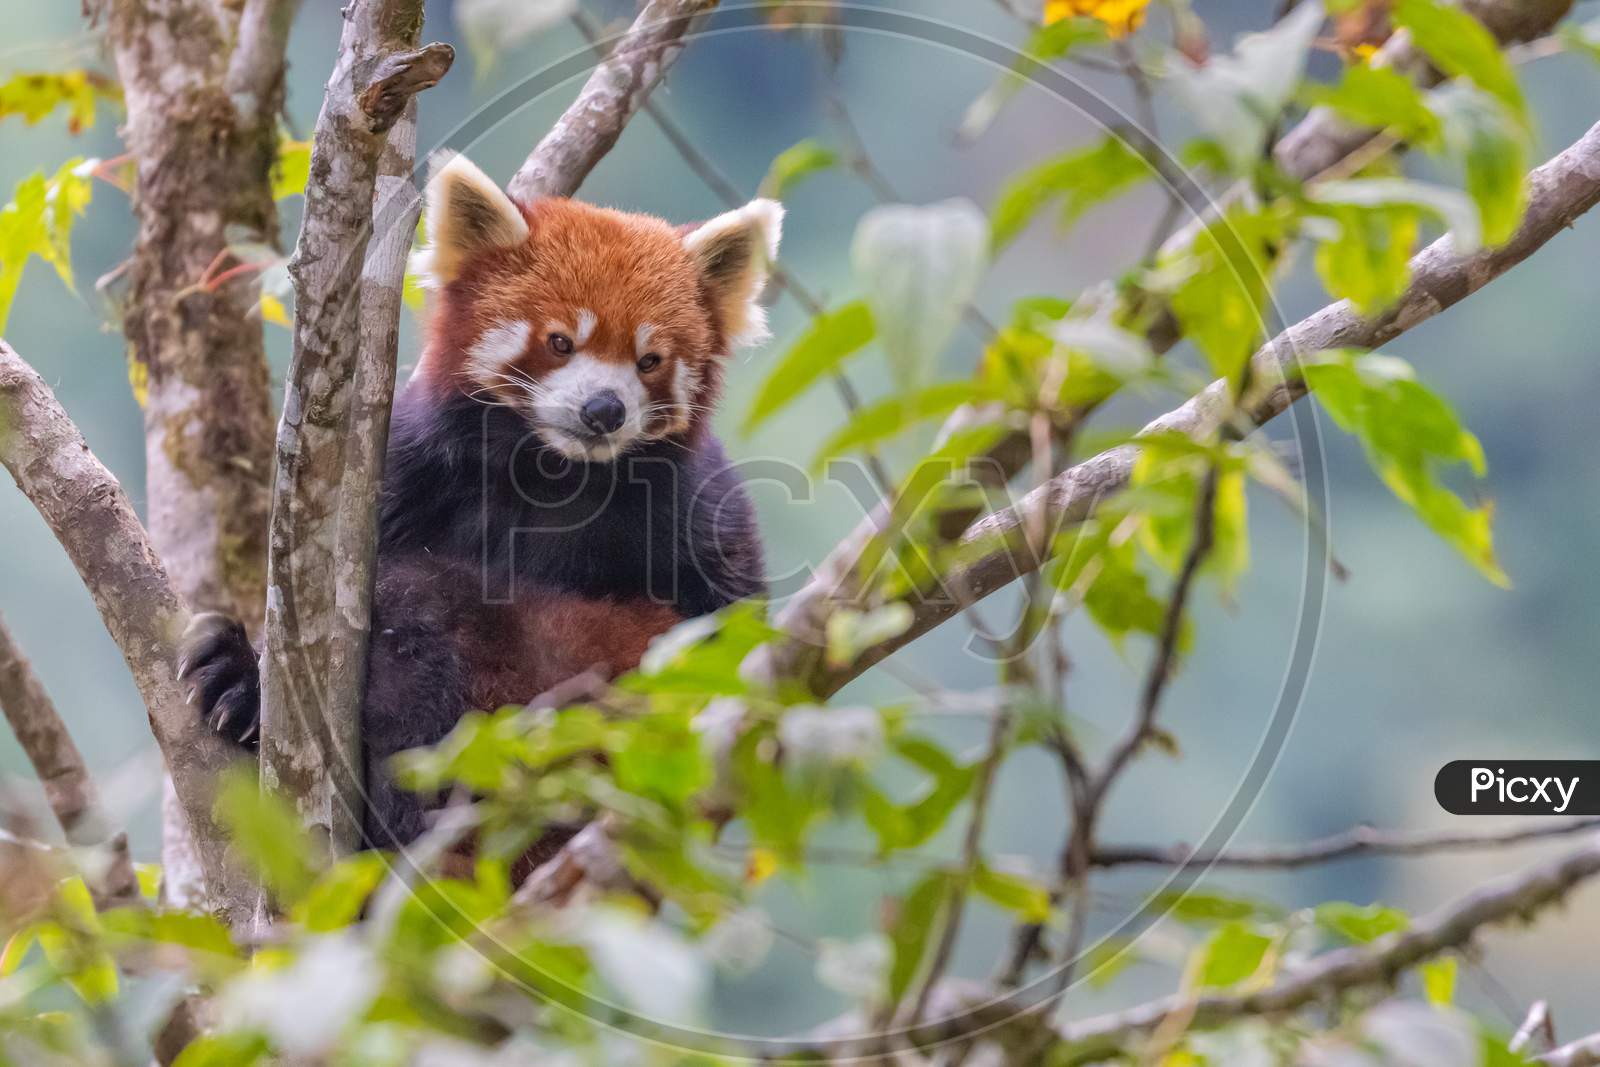 A red panda sitting on a tree